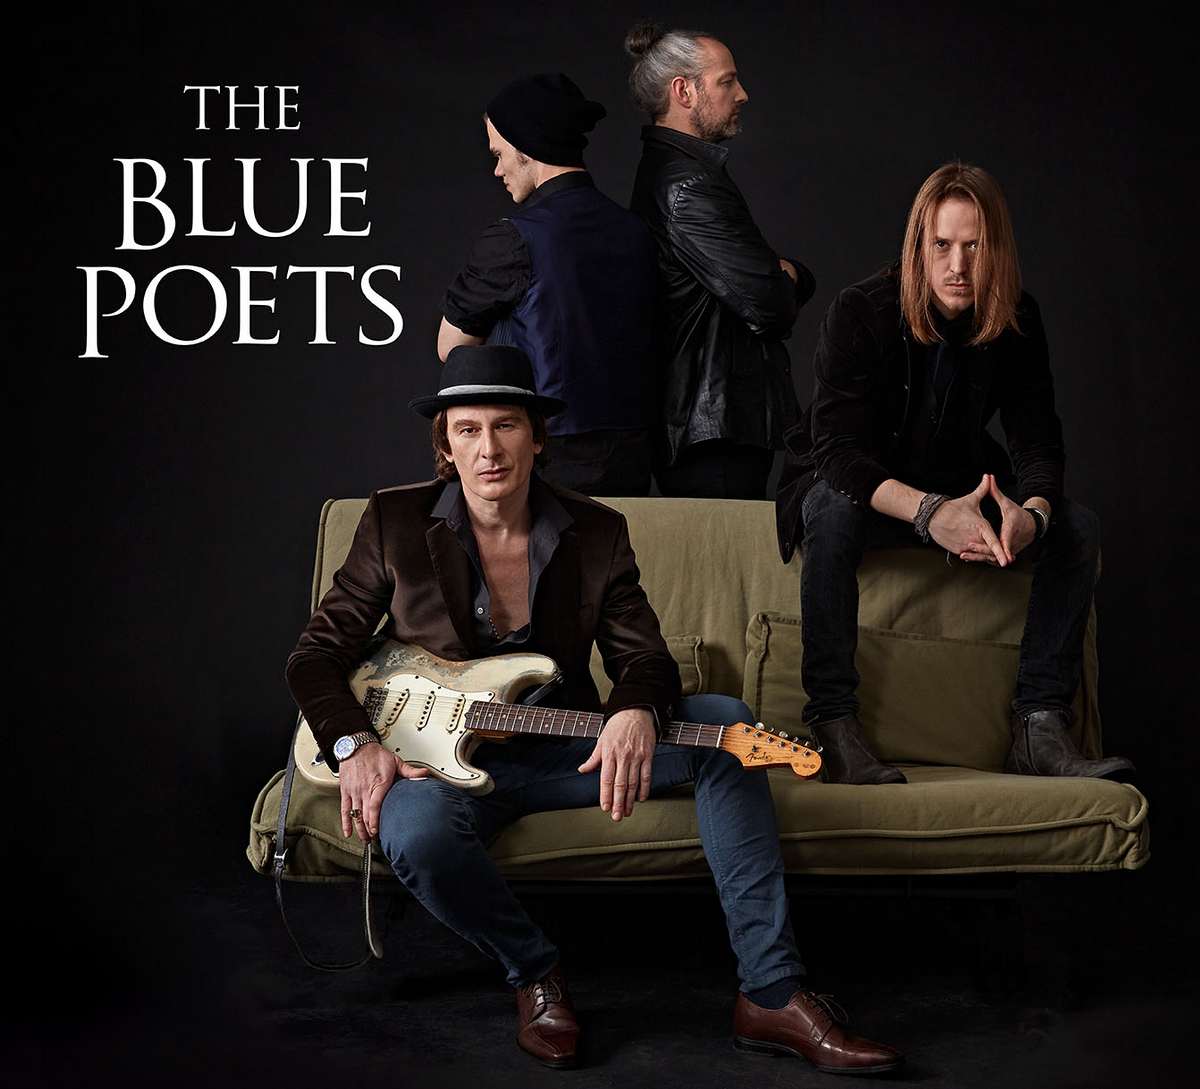 The Blue Poets: The Blue Poets (2016) Book Cover